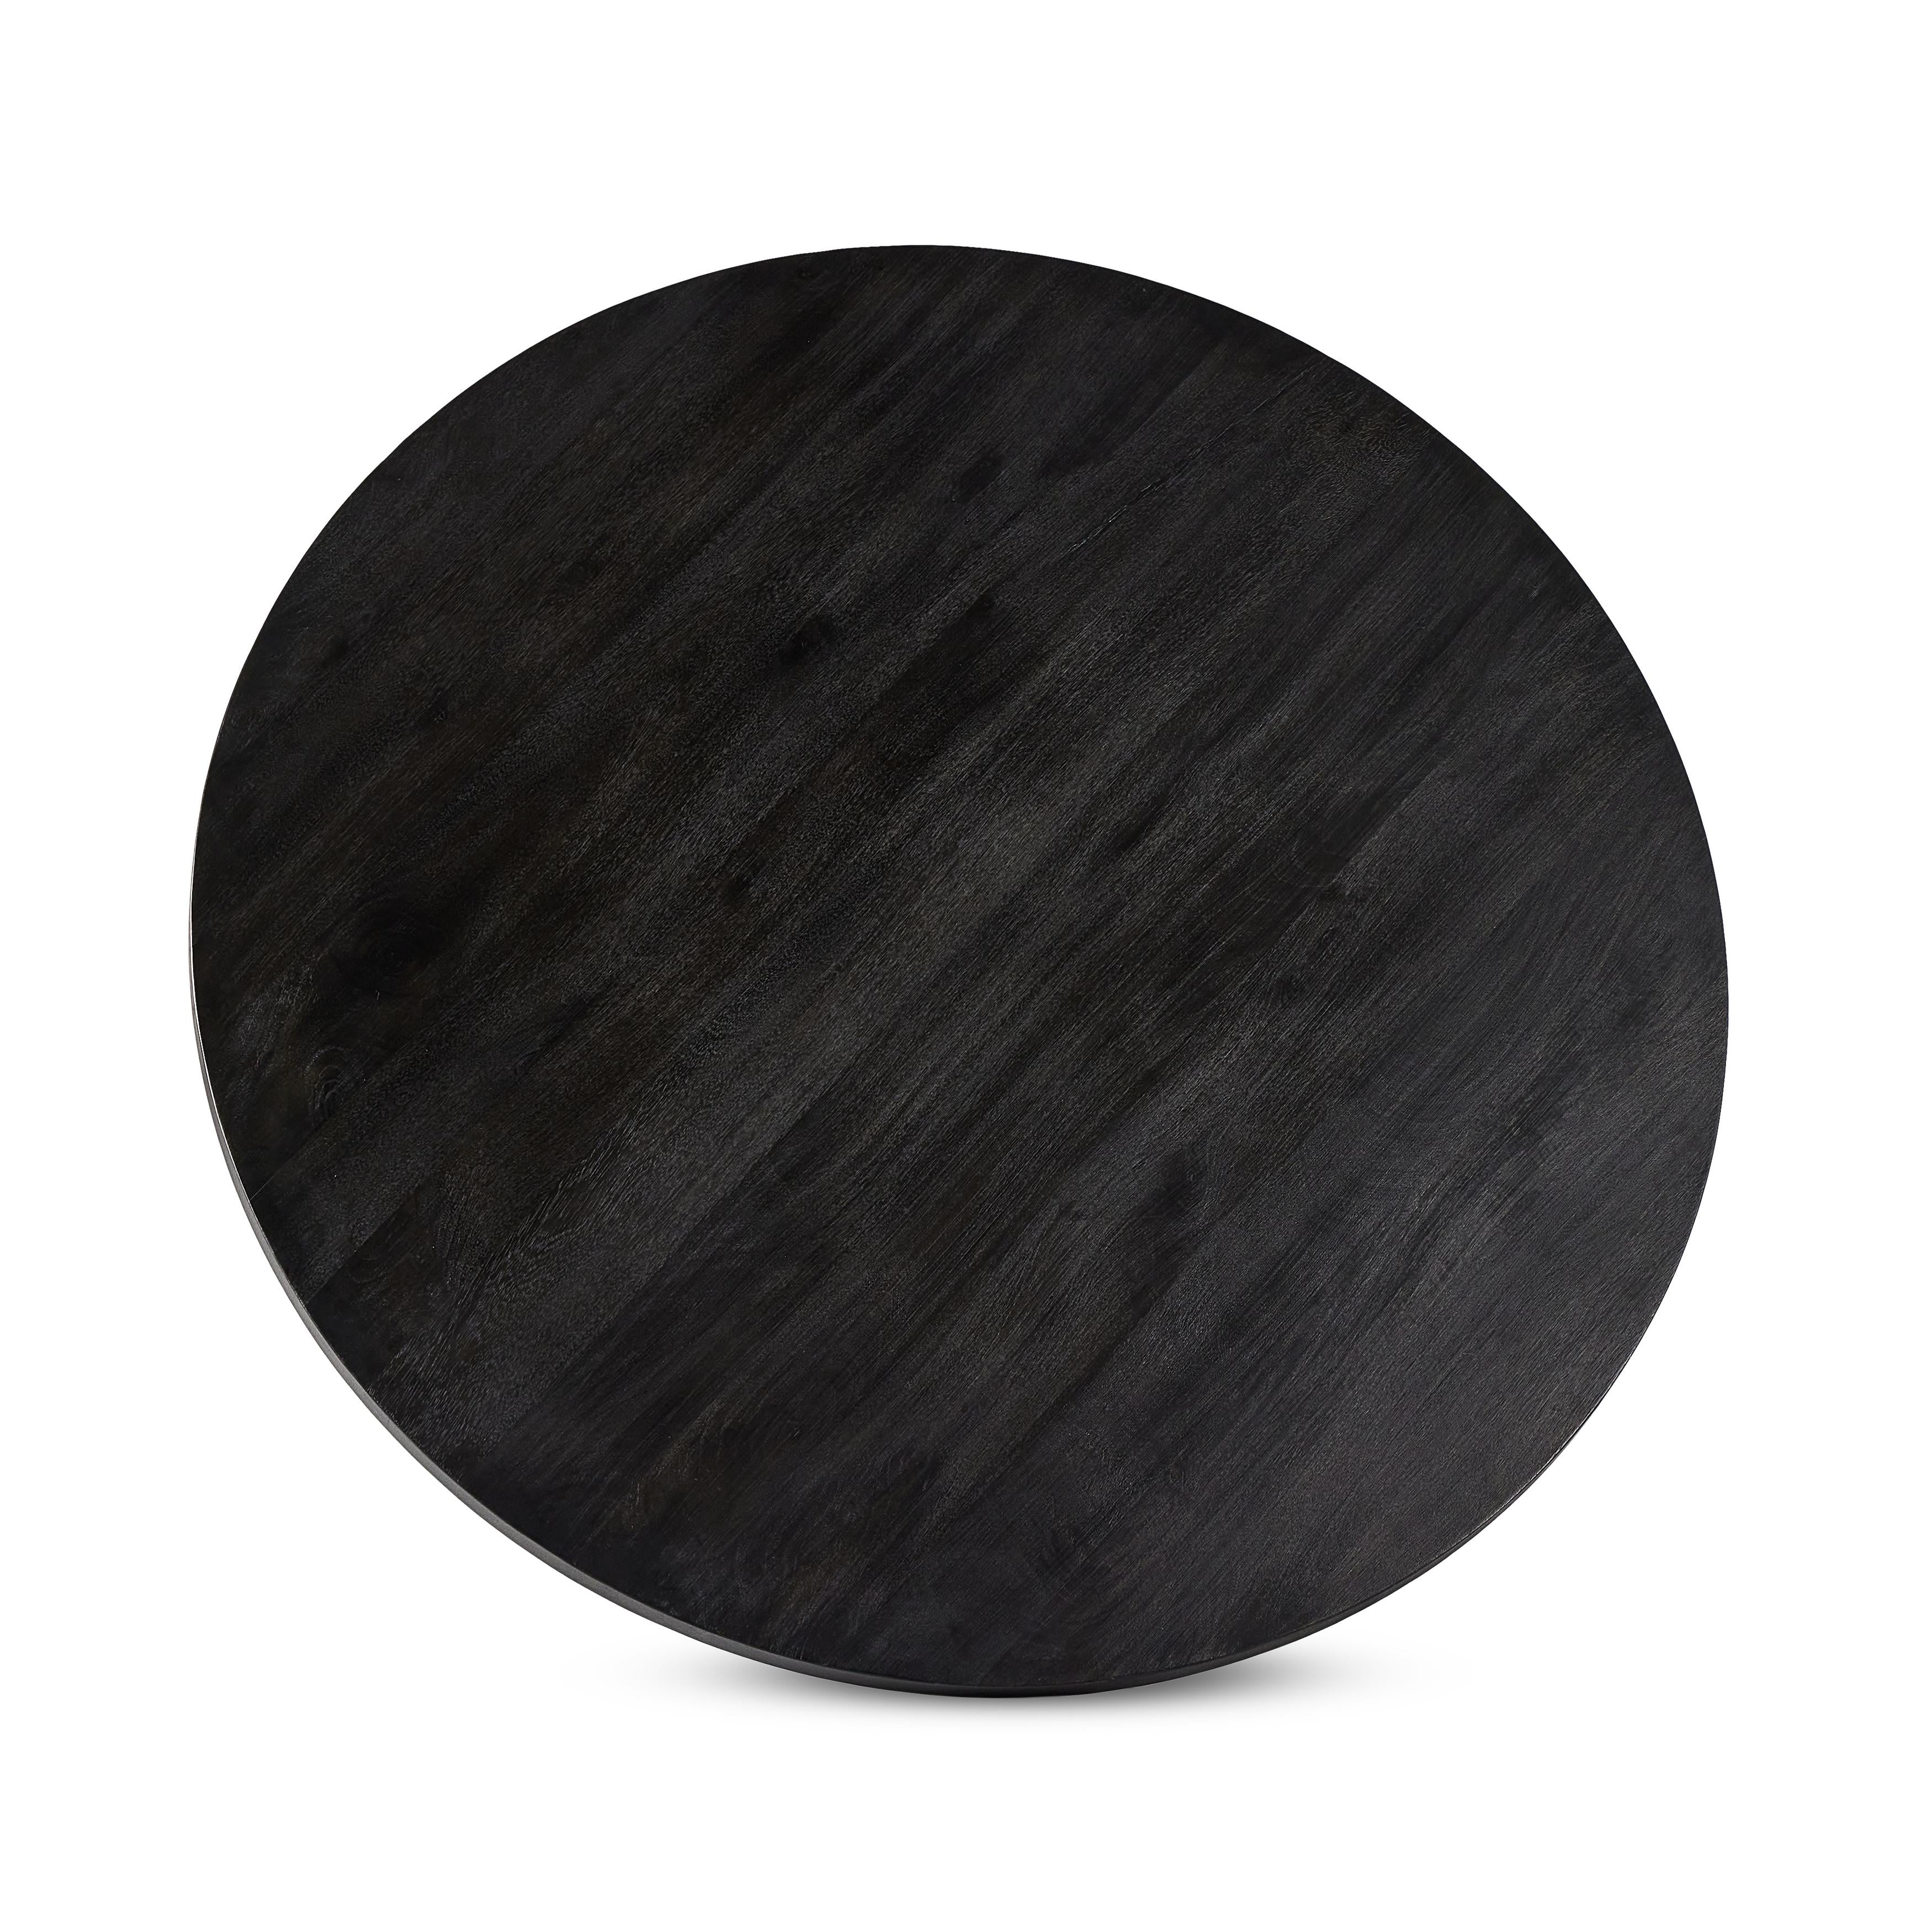 A rounded table of solid mango wood forms purposefully burnished edges, producing a warm black patina for the home dining table. Amethyst Home provides interior design, new construction, custom furniture, and area rugs in the Washington metro area.